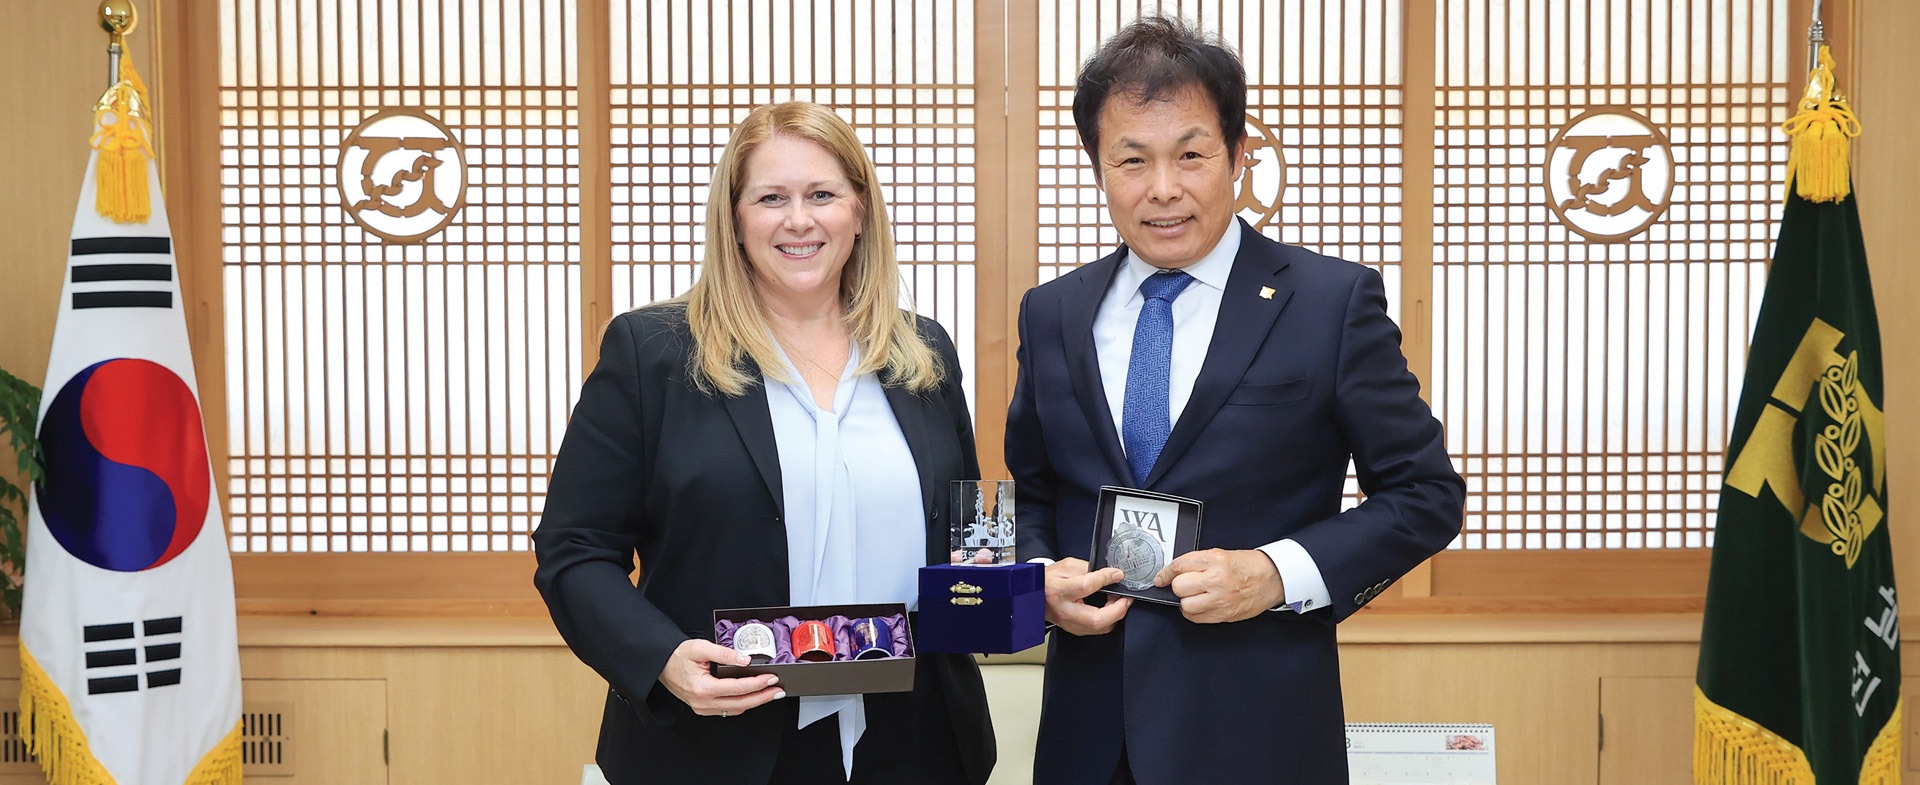 President Lepre traveled to South Korea to meet with CNU President Jung Sungteak